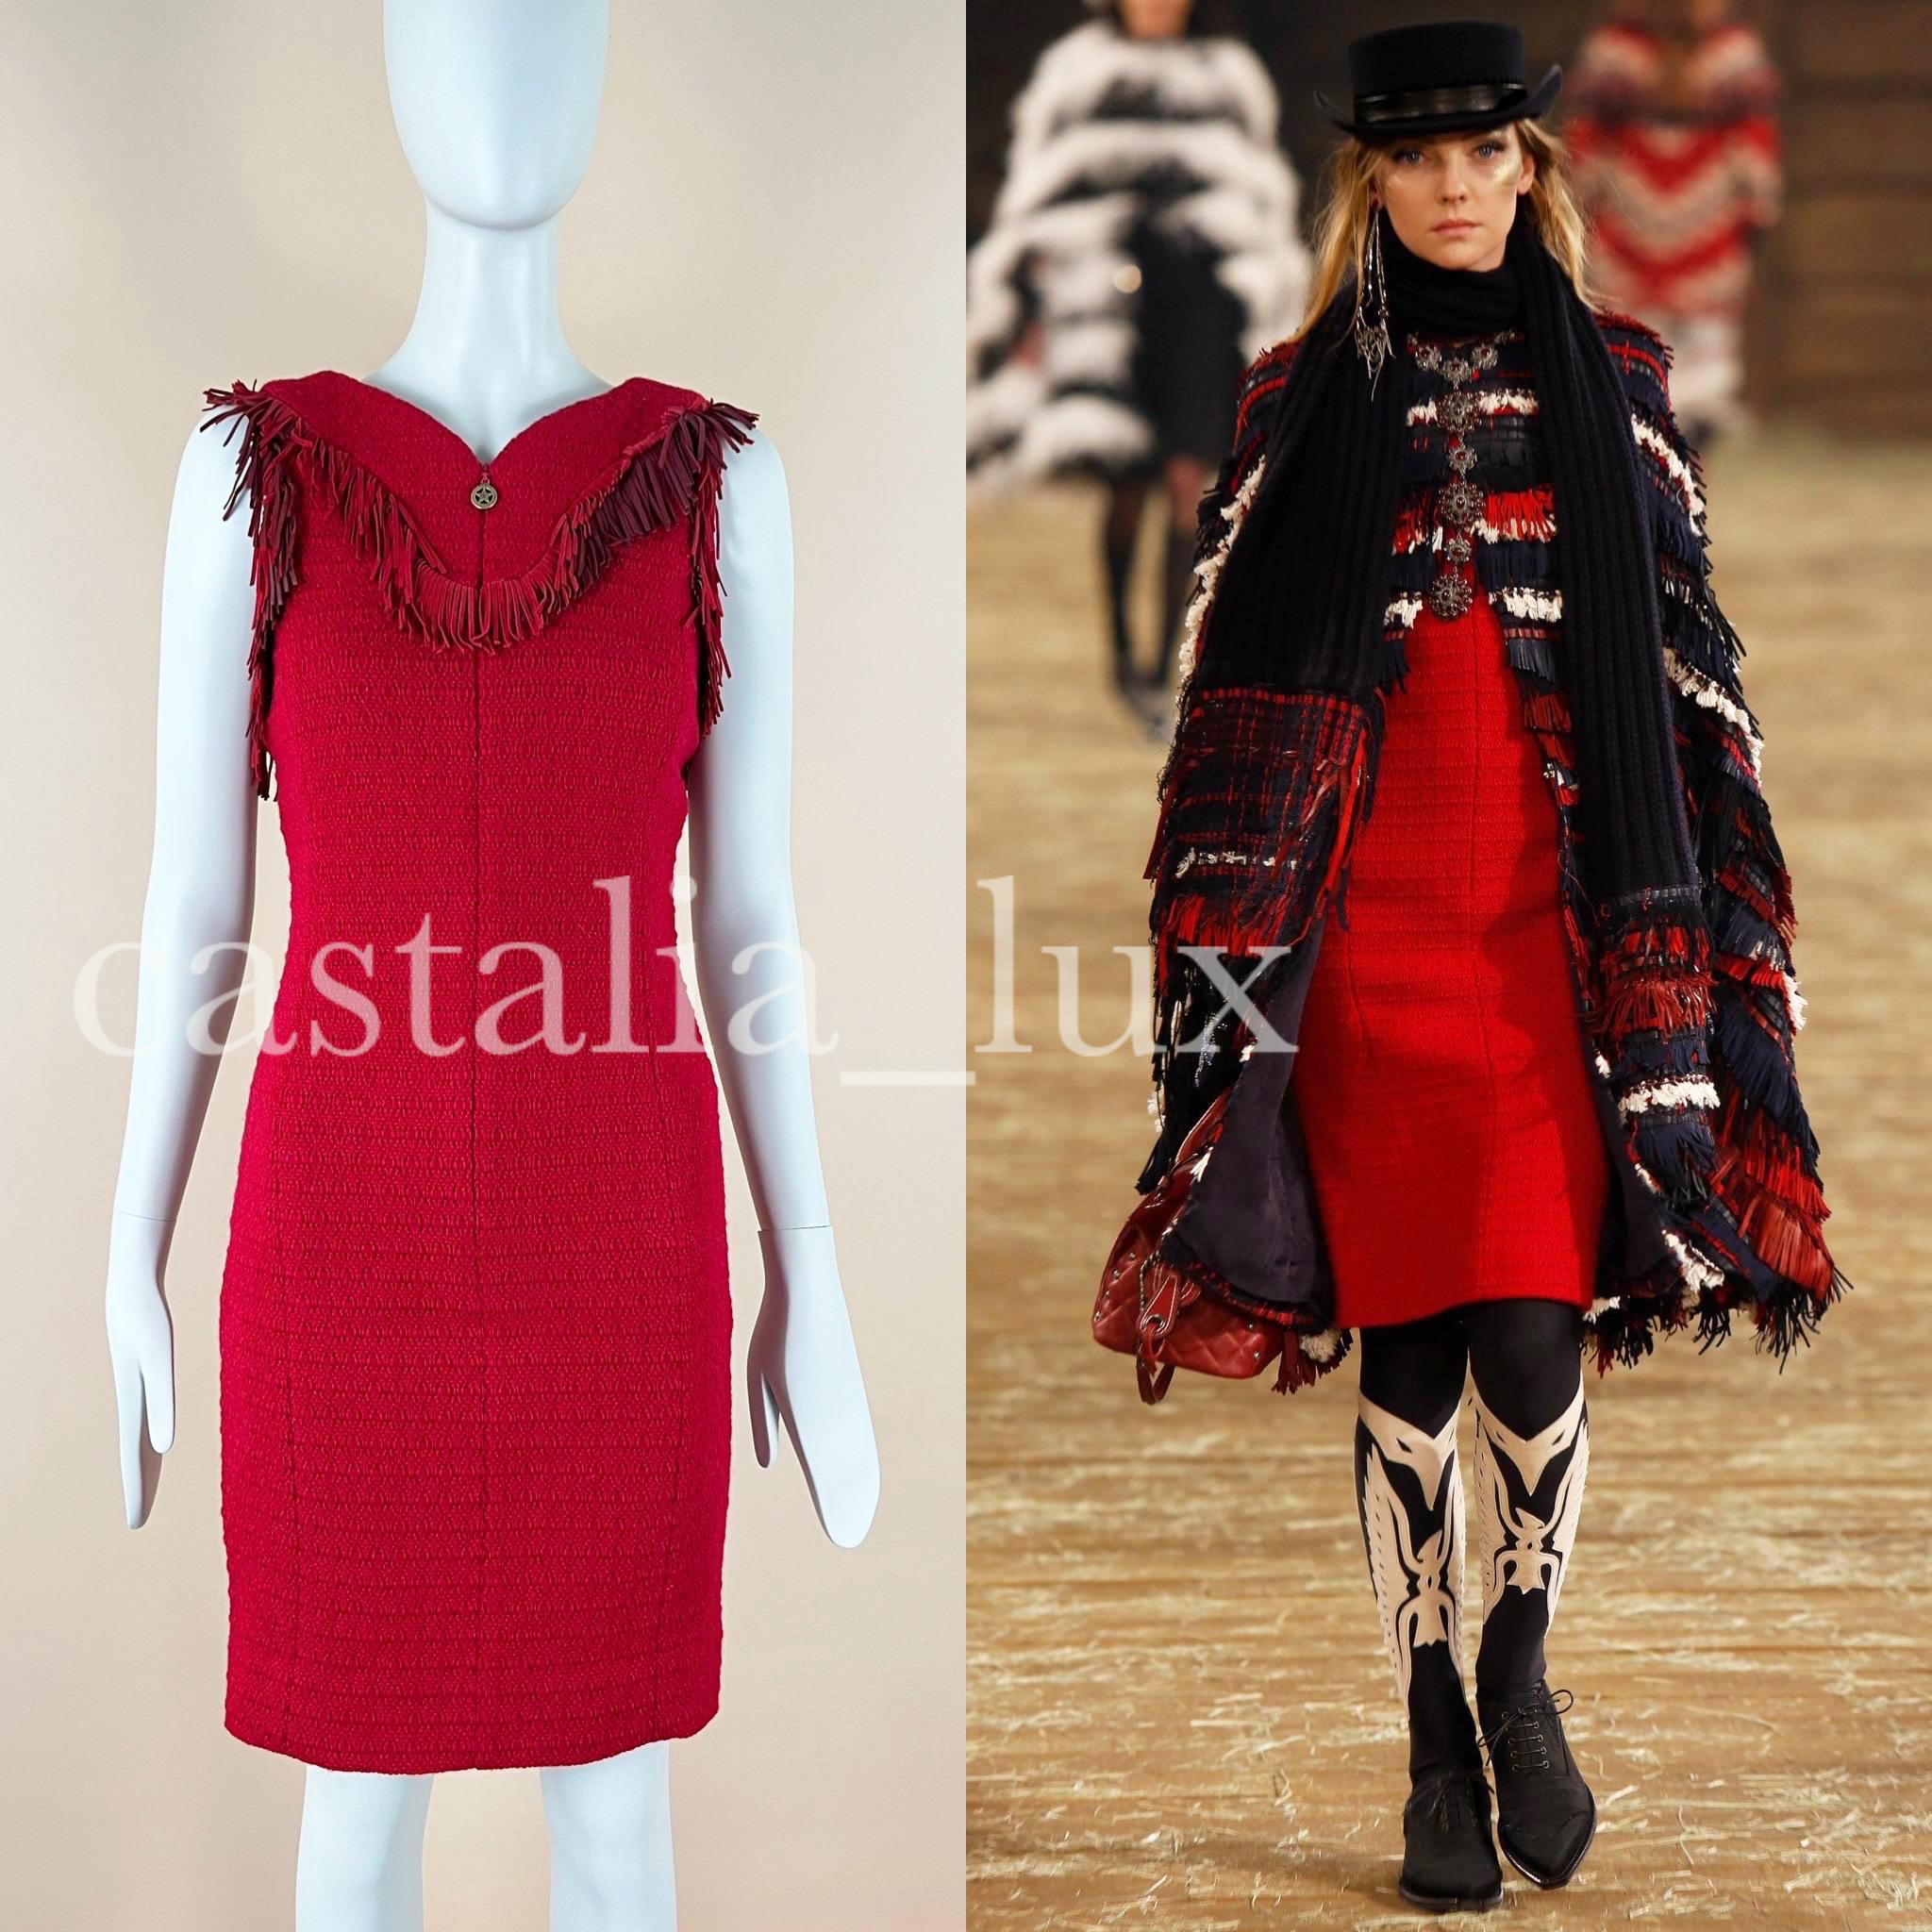 New stunning red tweed dress with leather fringe details from Runway of Paris / Dallas 2014 Pre-fall collection
Size mark 34 fr. NEVER WORN.
- CC logo star charm zip at front 
- full silk lining